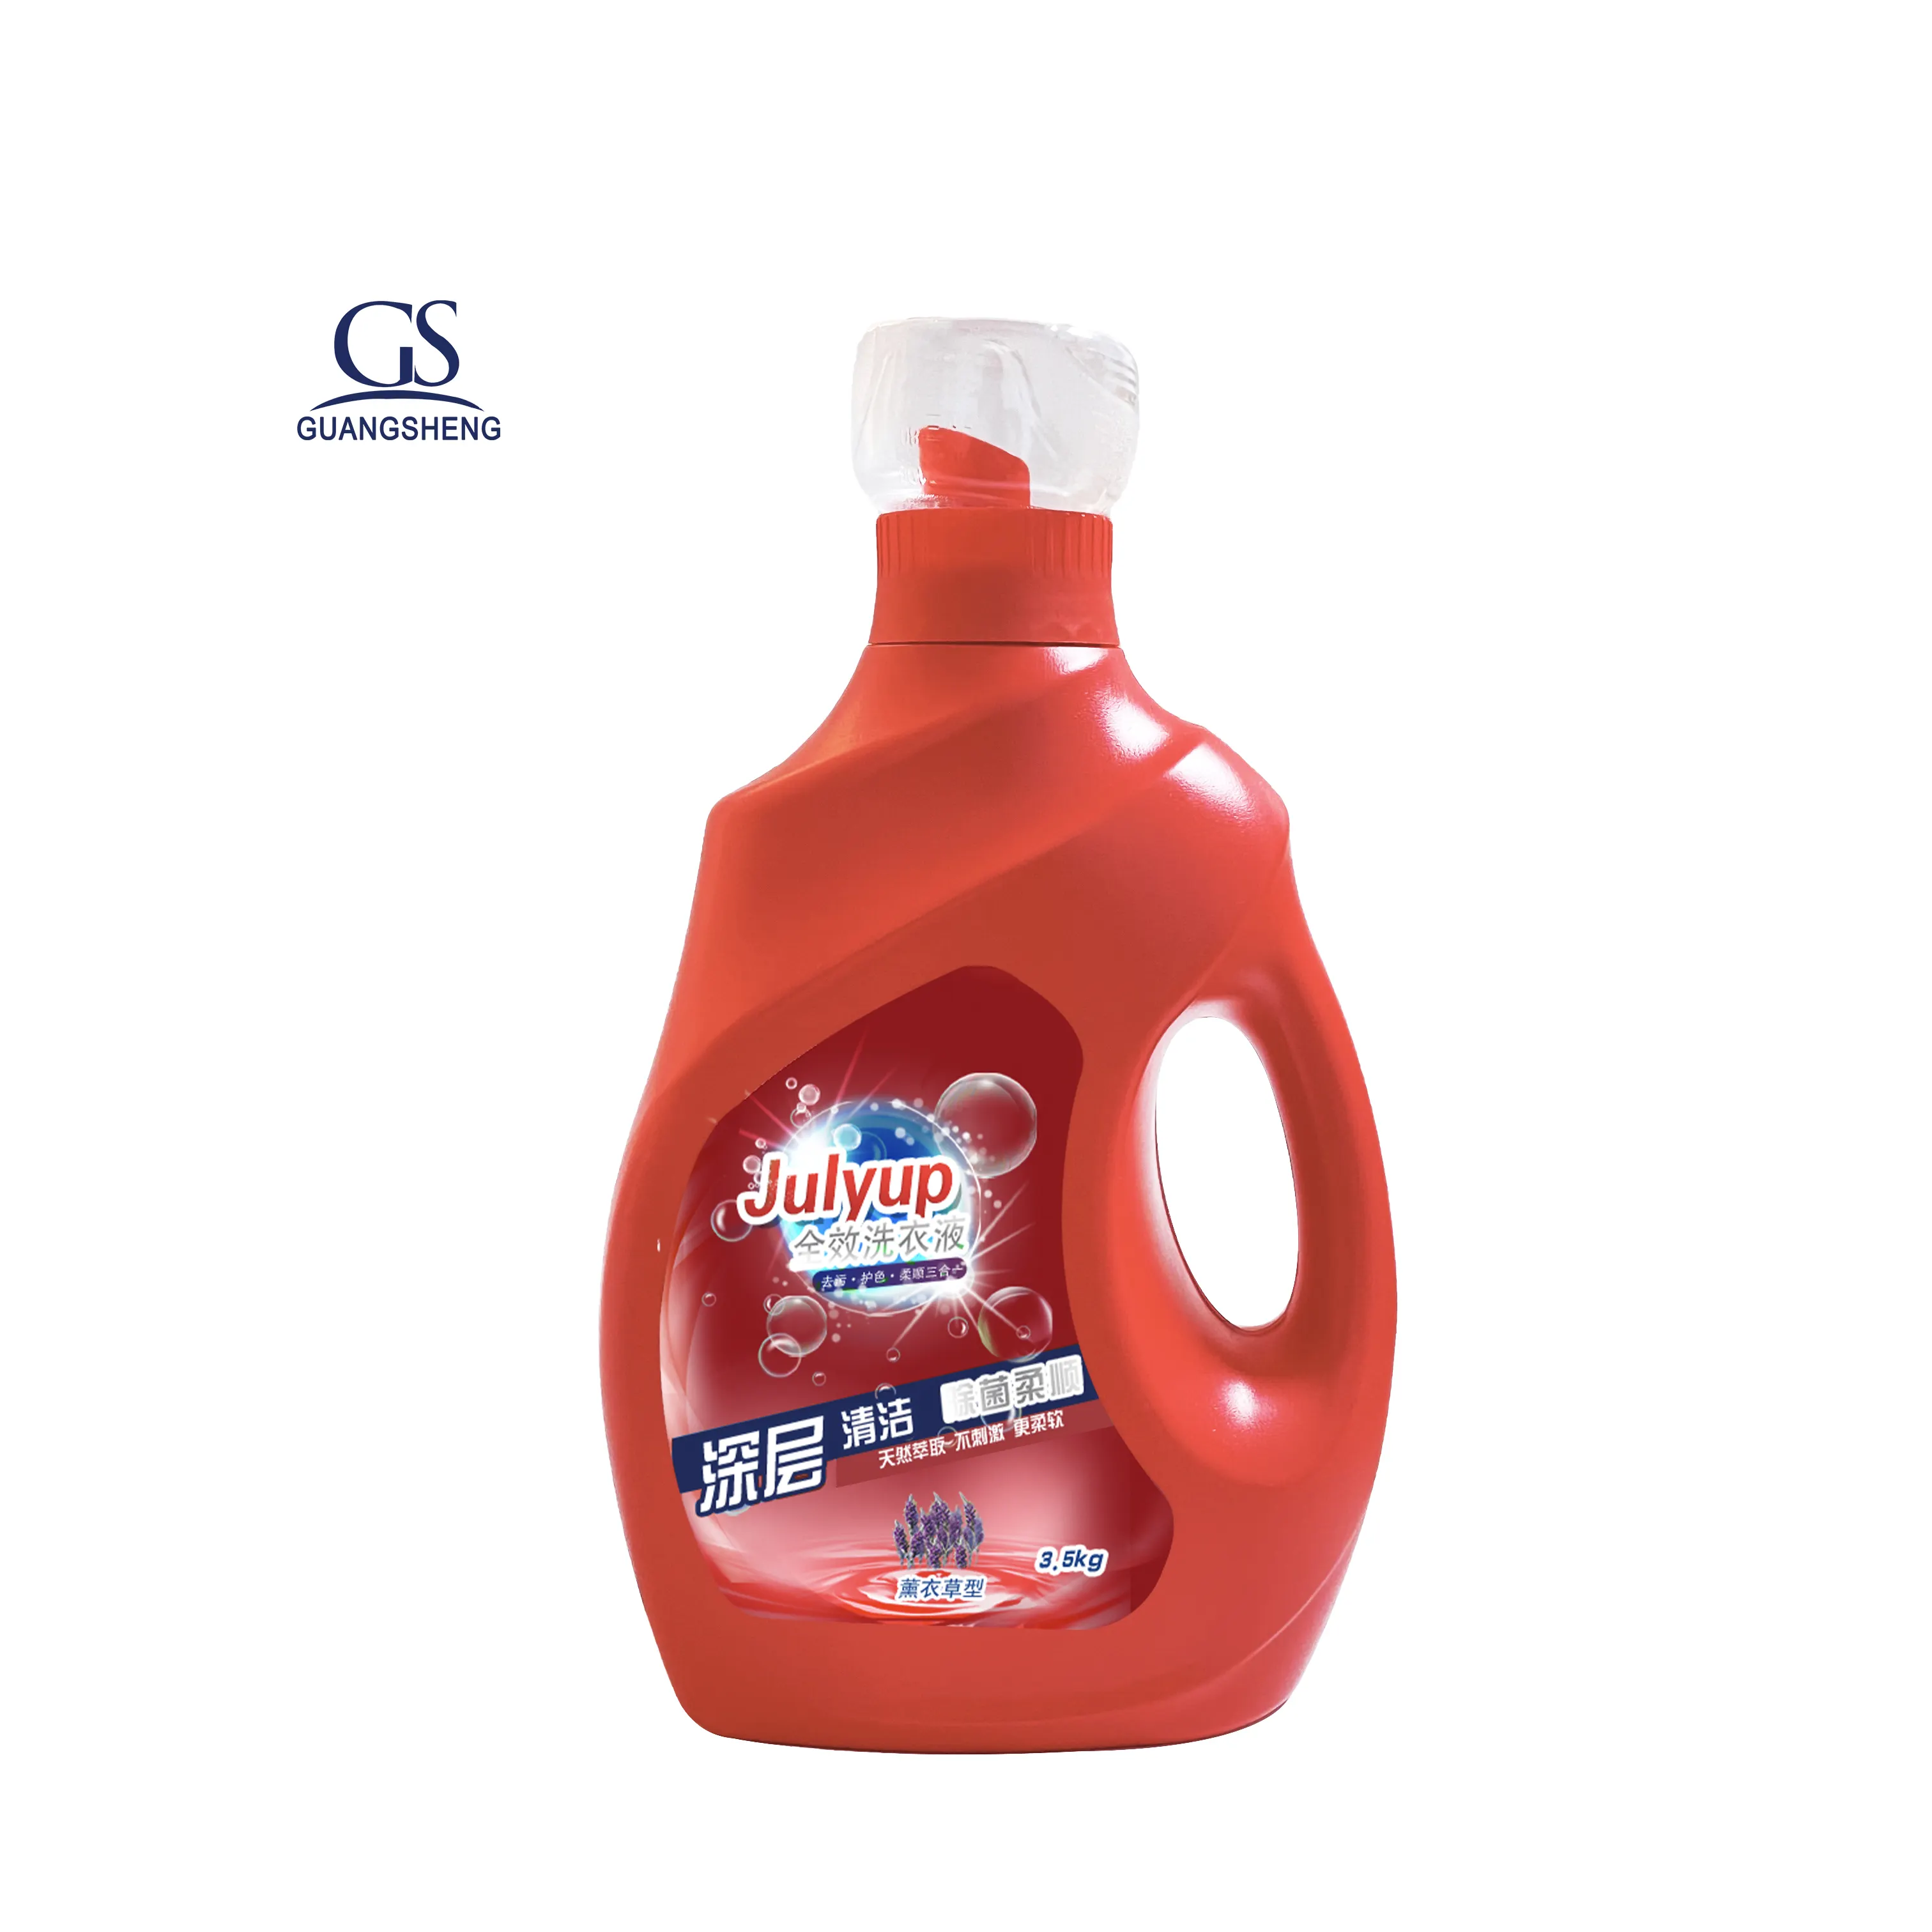 liquid detergent for automatic washing machine laundry liquid detergent manufacturer liquid detergent washing clothes